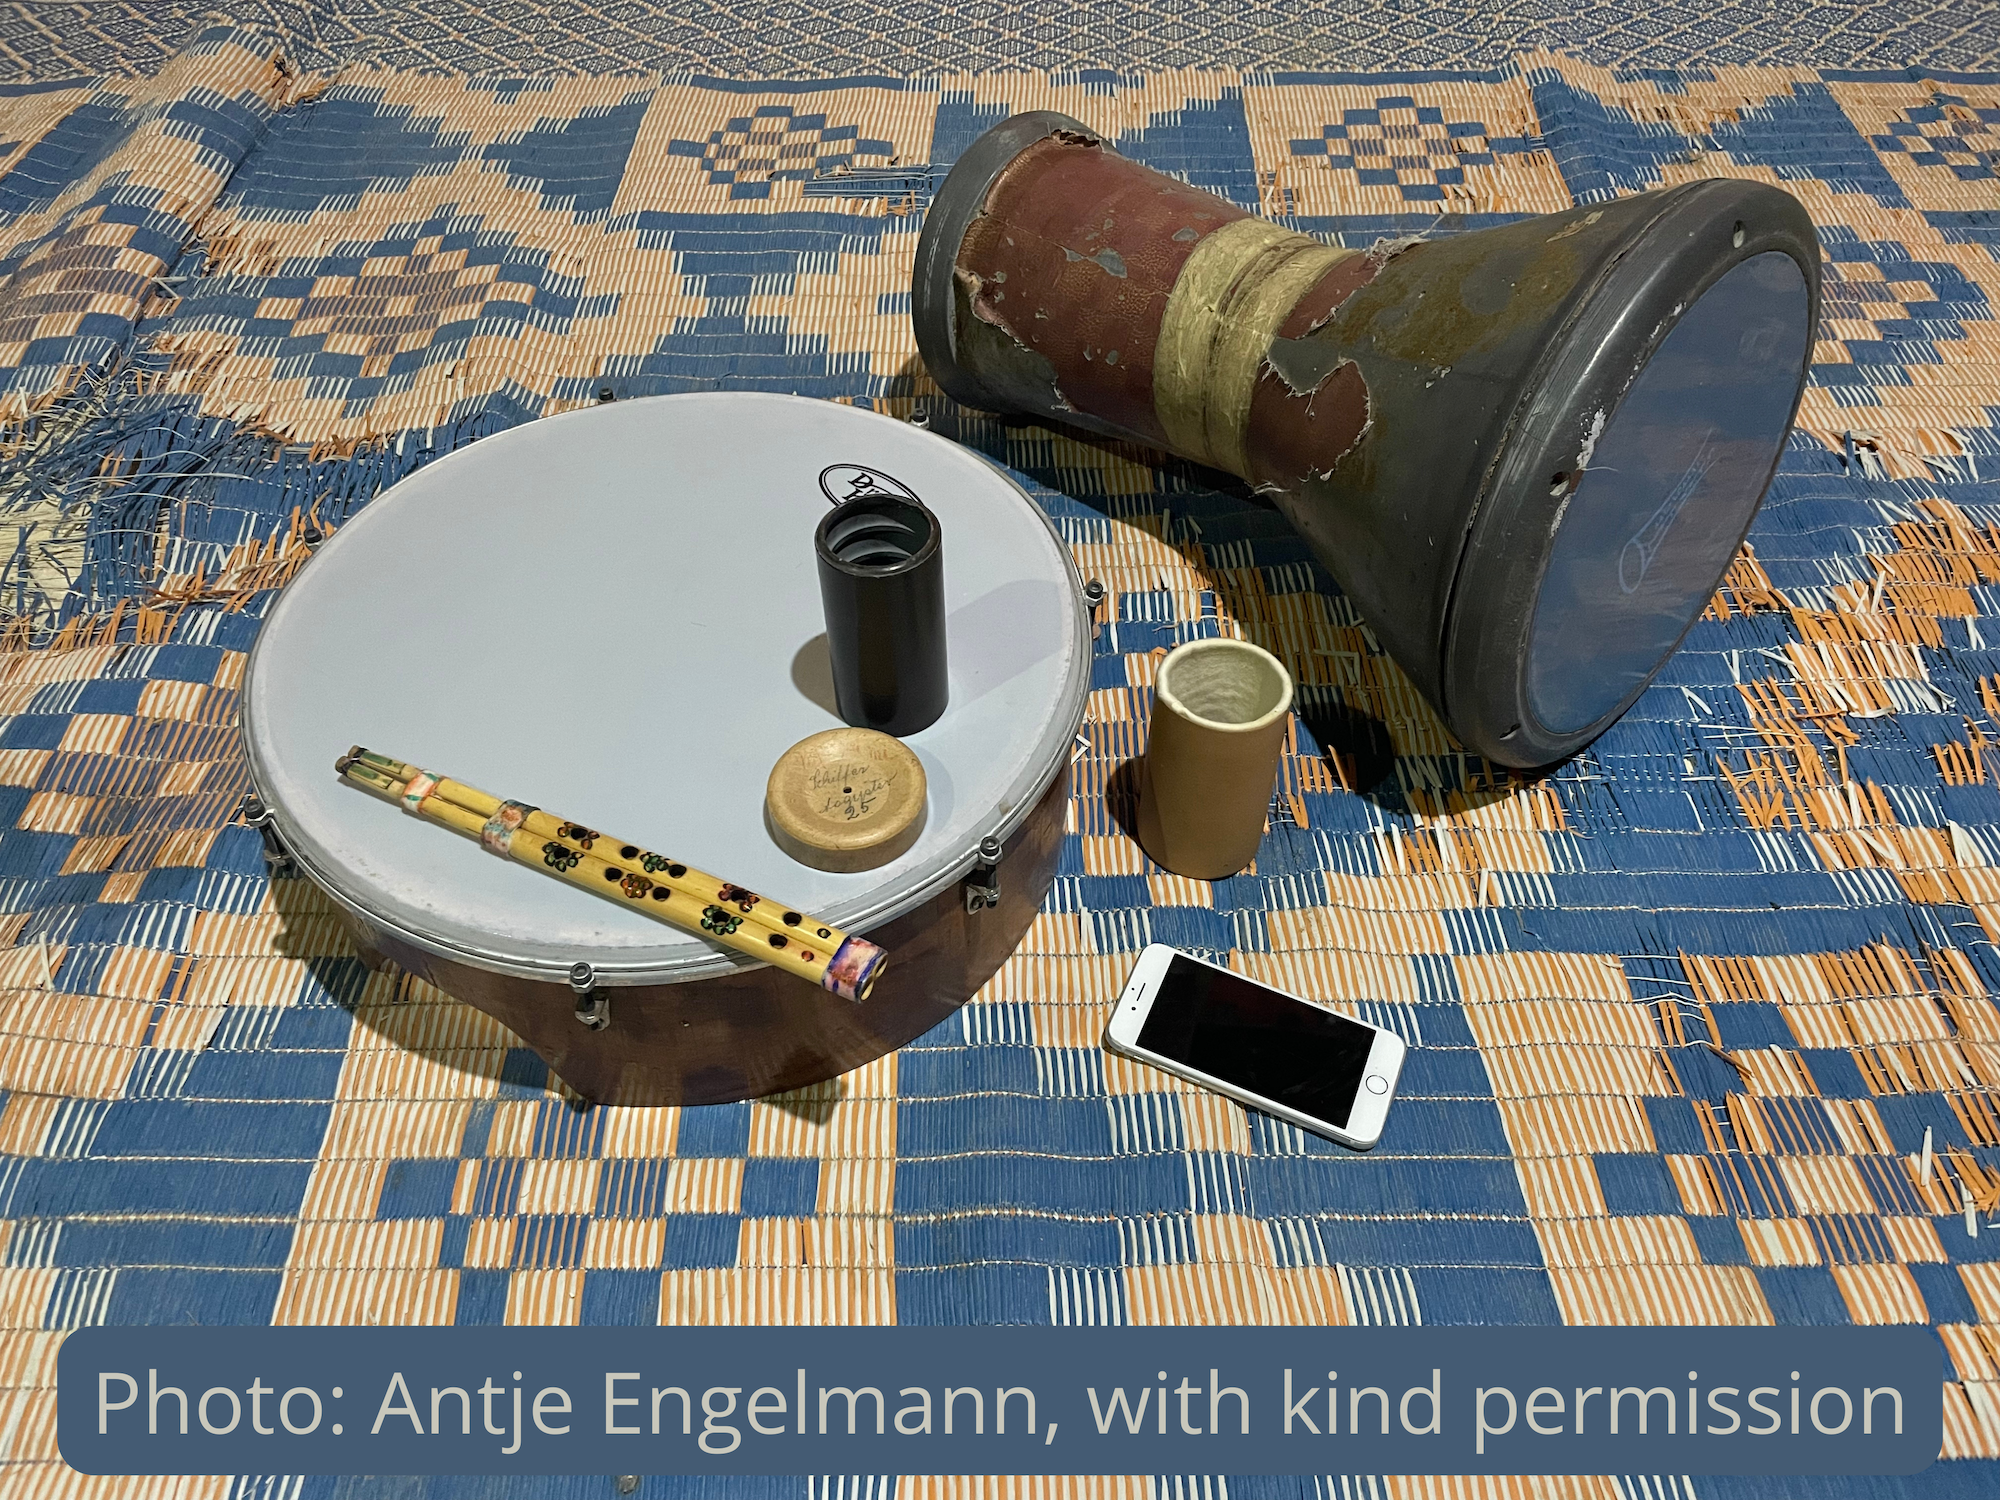 Wax cylinders from the Brigitte Schiffer Collection at the Berlin-Phonogrammarchiv, instruments from the Siwa Oasis (from left to right: ẓẓṃaṛ ("clarinet"), ddarbukət (darbuka) and tagdamt), March 2023.